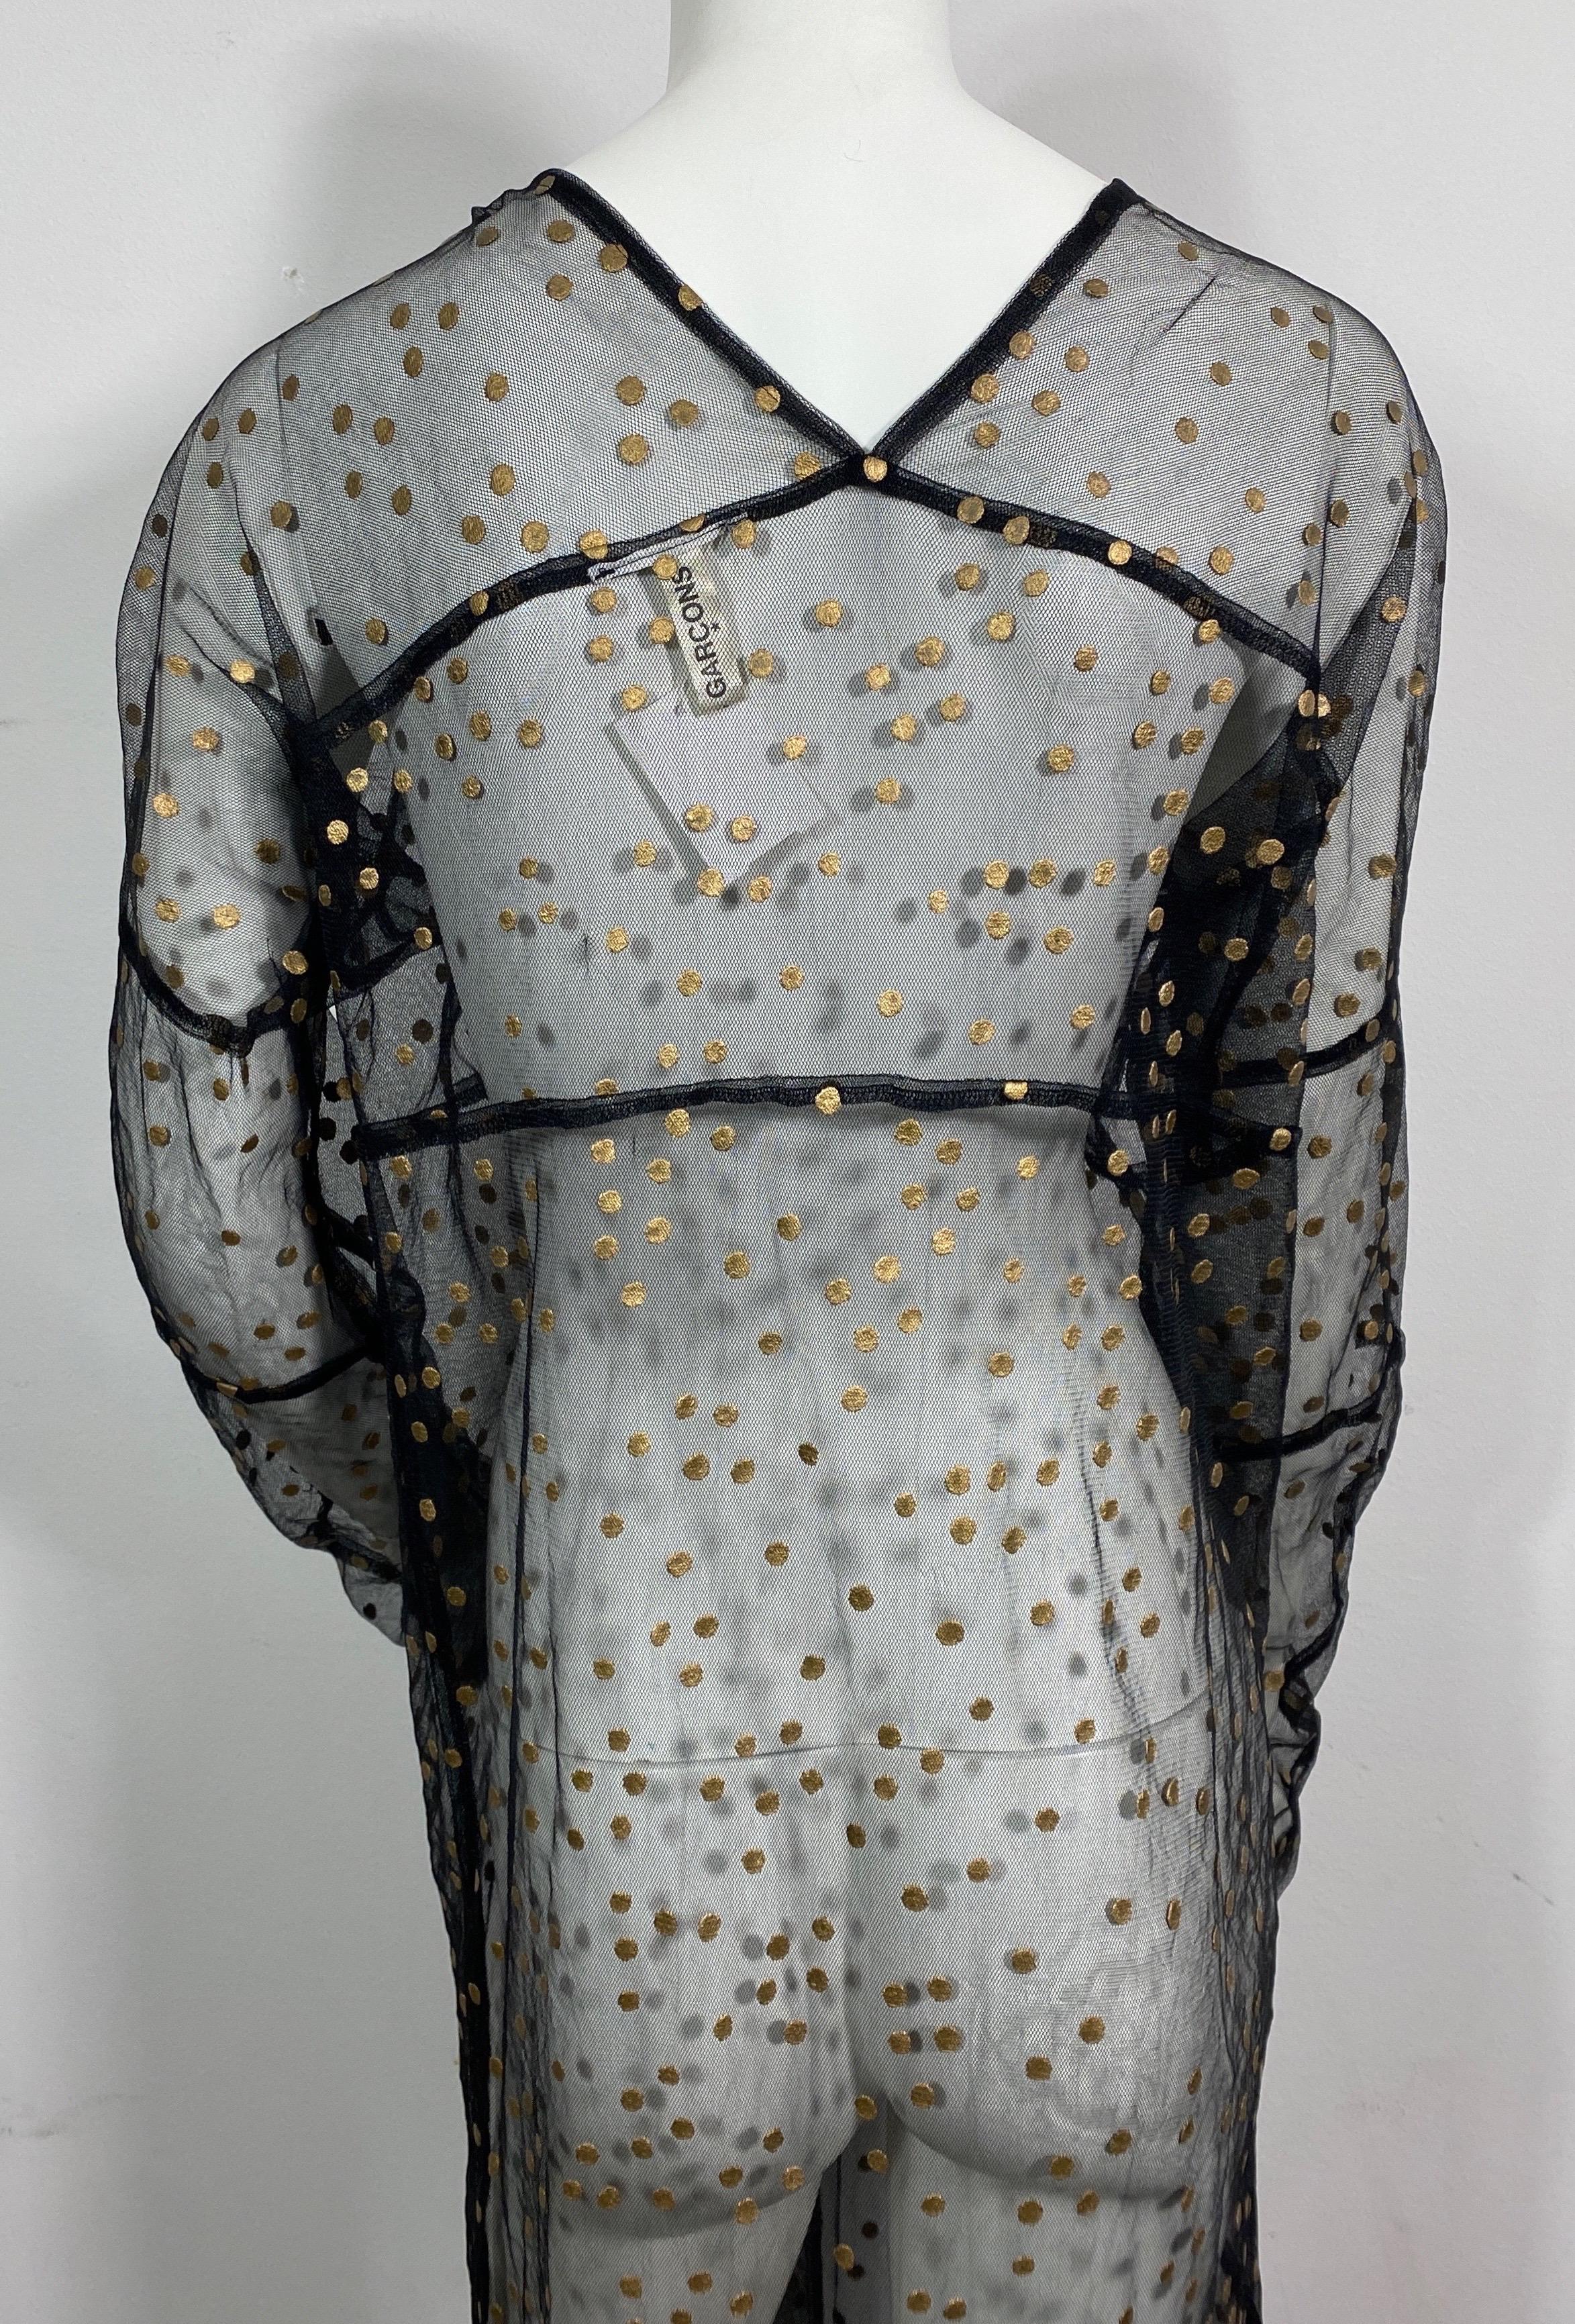 Comme des Garçons 2000’s Black and Gold Polka Dot Sheer Long Dress-Size Small For Sale 5